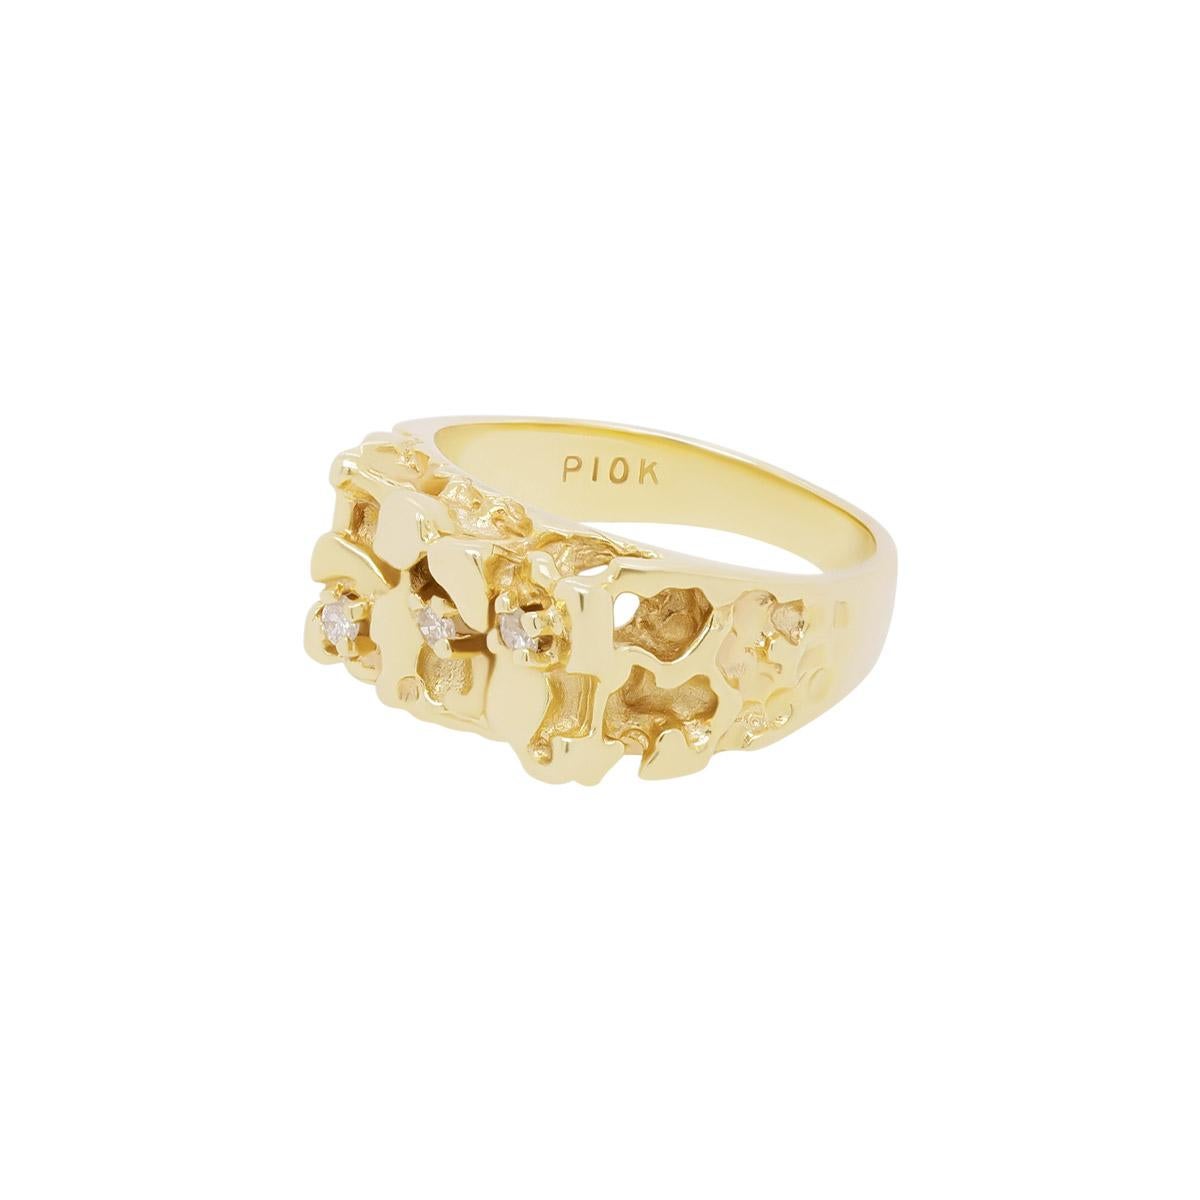 This unique chunky solid 10K gold ring is a vintage one of a kind piece, designed with three 2mm diamonds set diagonally across the top of a gold nugget pattern. Suitable for both women and men this piece can be worn as a stand alone statement ring